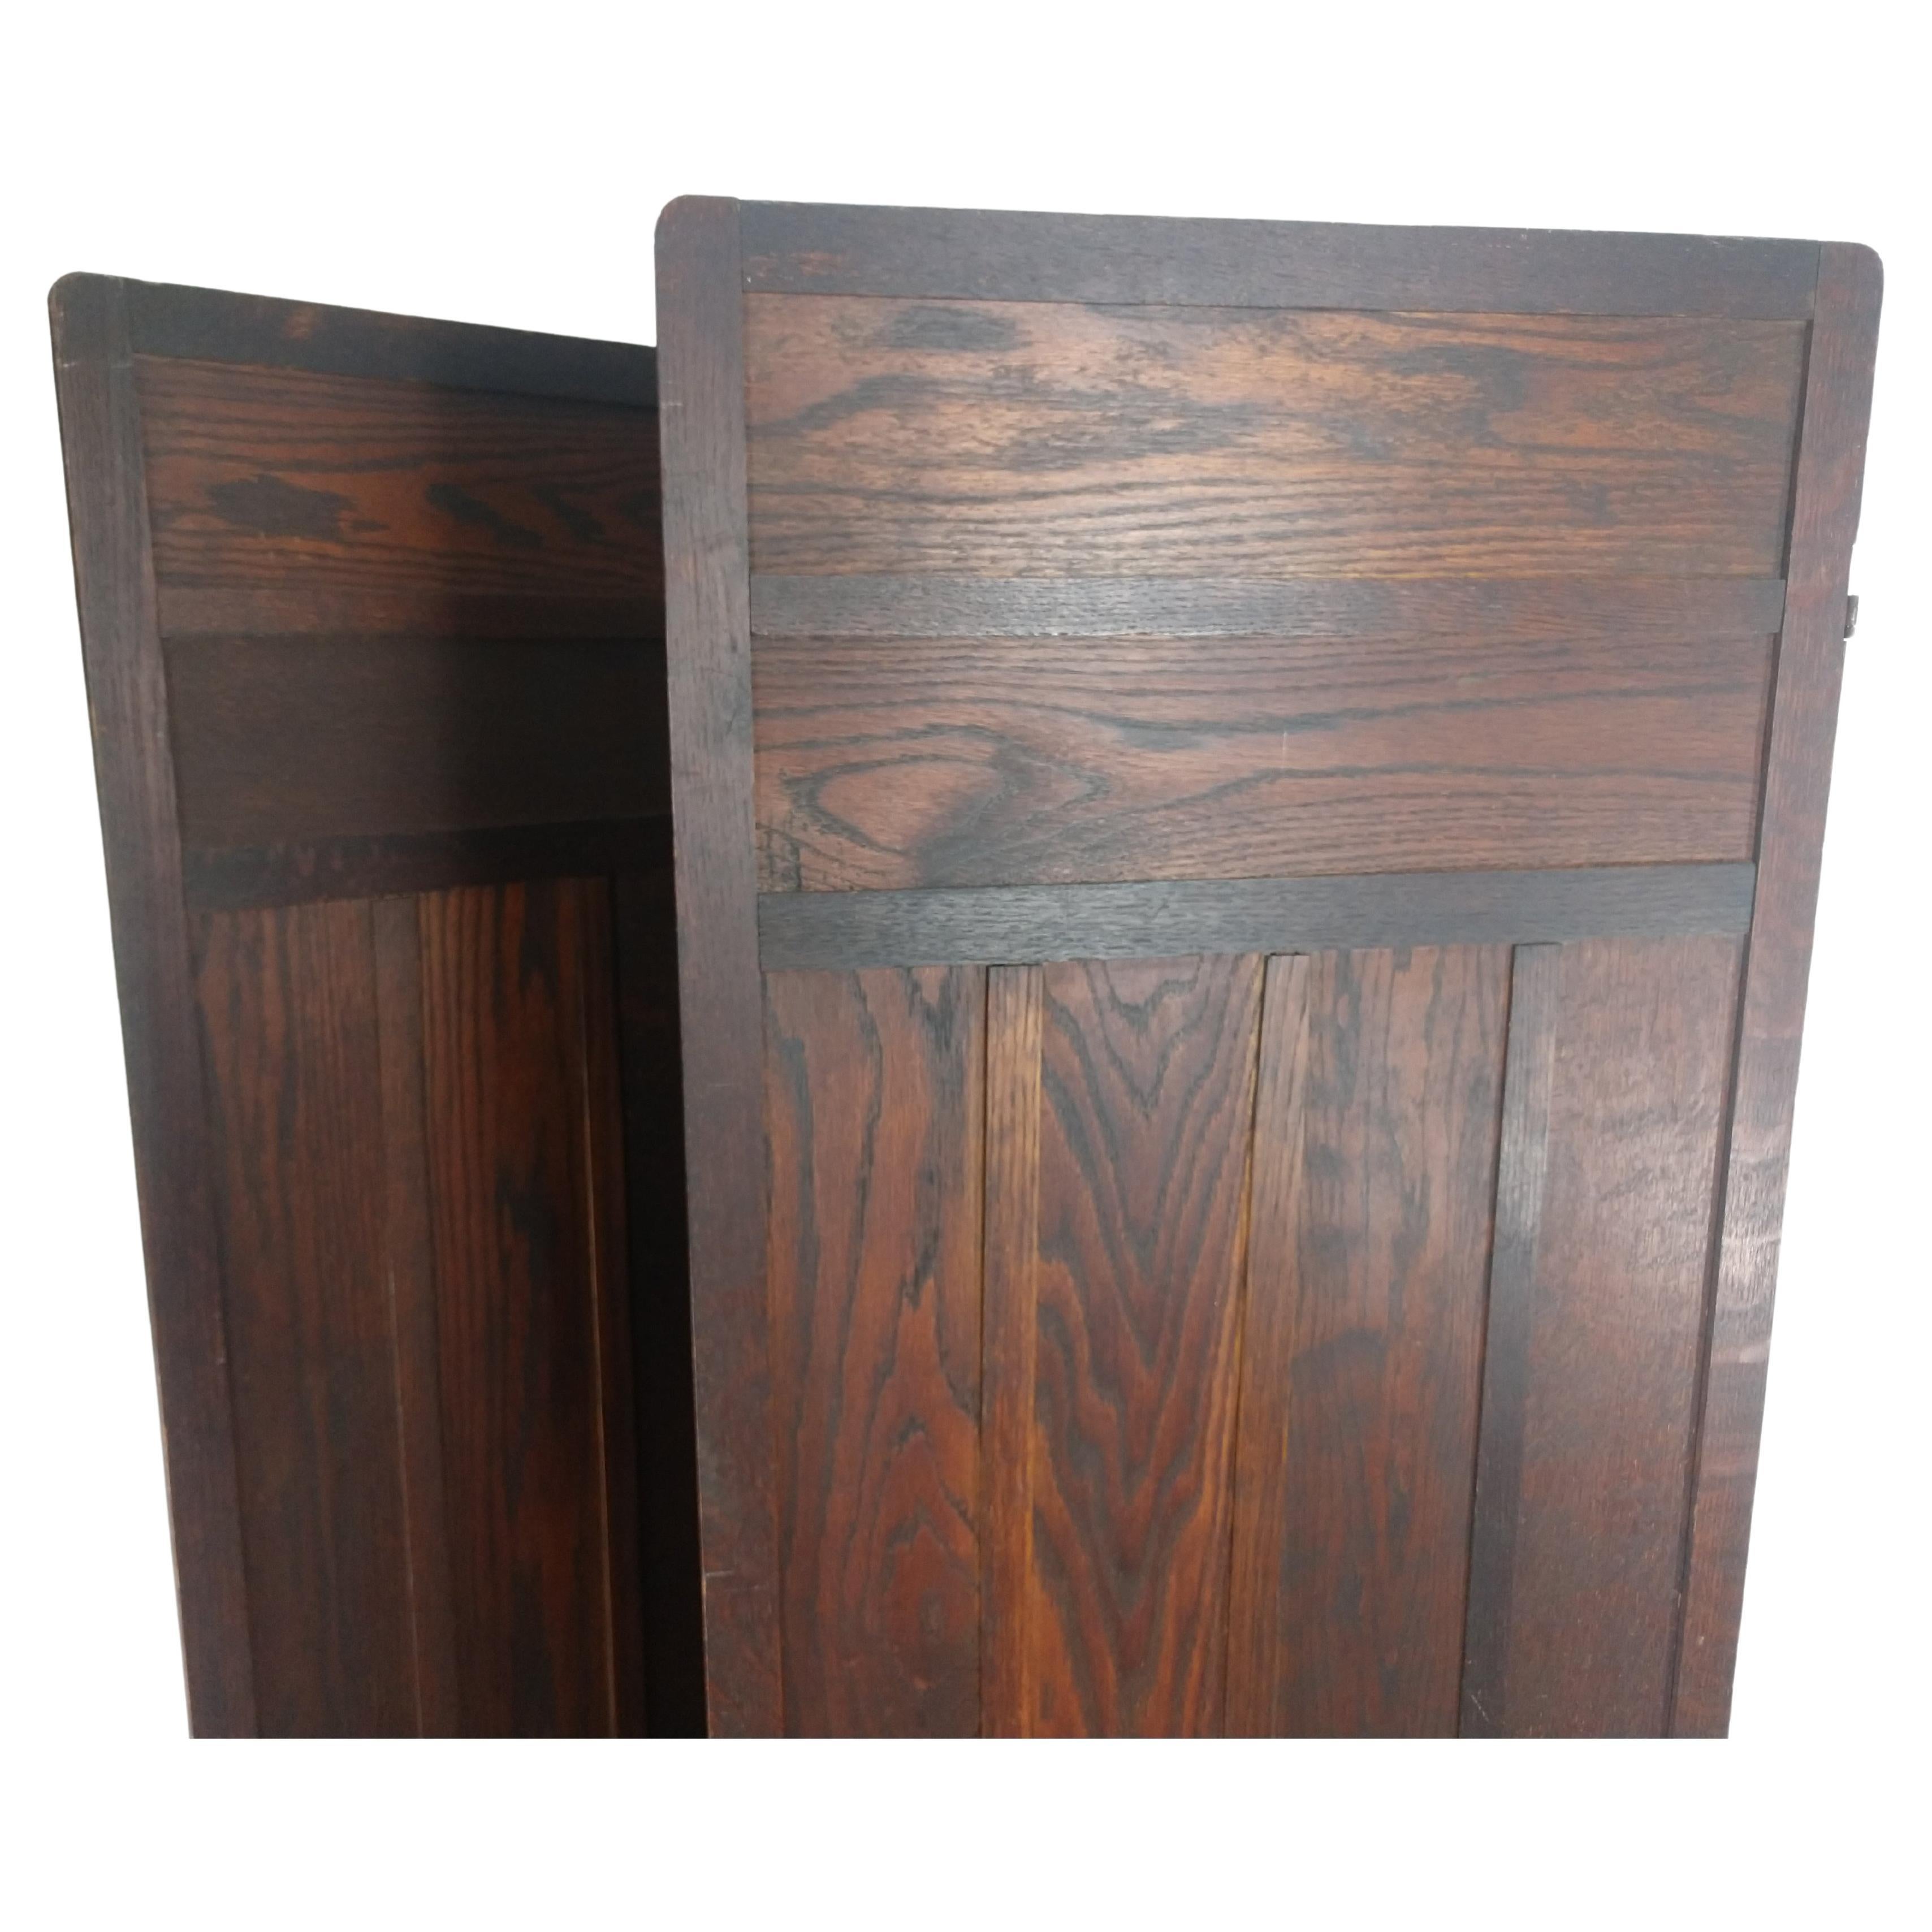 Period arts & crafts screen created from quarter sawn oak in a dark finish. In original condition with minimal wear. Simple and elegant work. This item folds flat, each panel is 19.75 inches wide by 68.25 high. Can be parcel posted. 
 